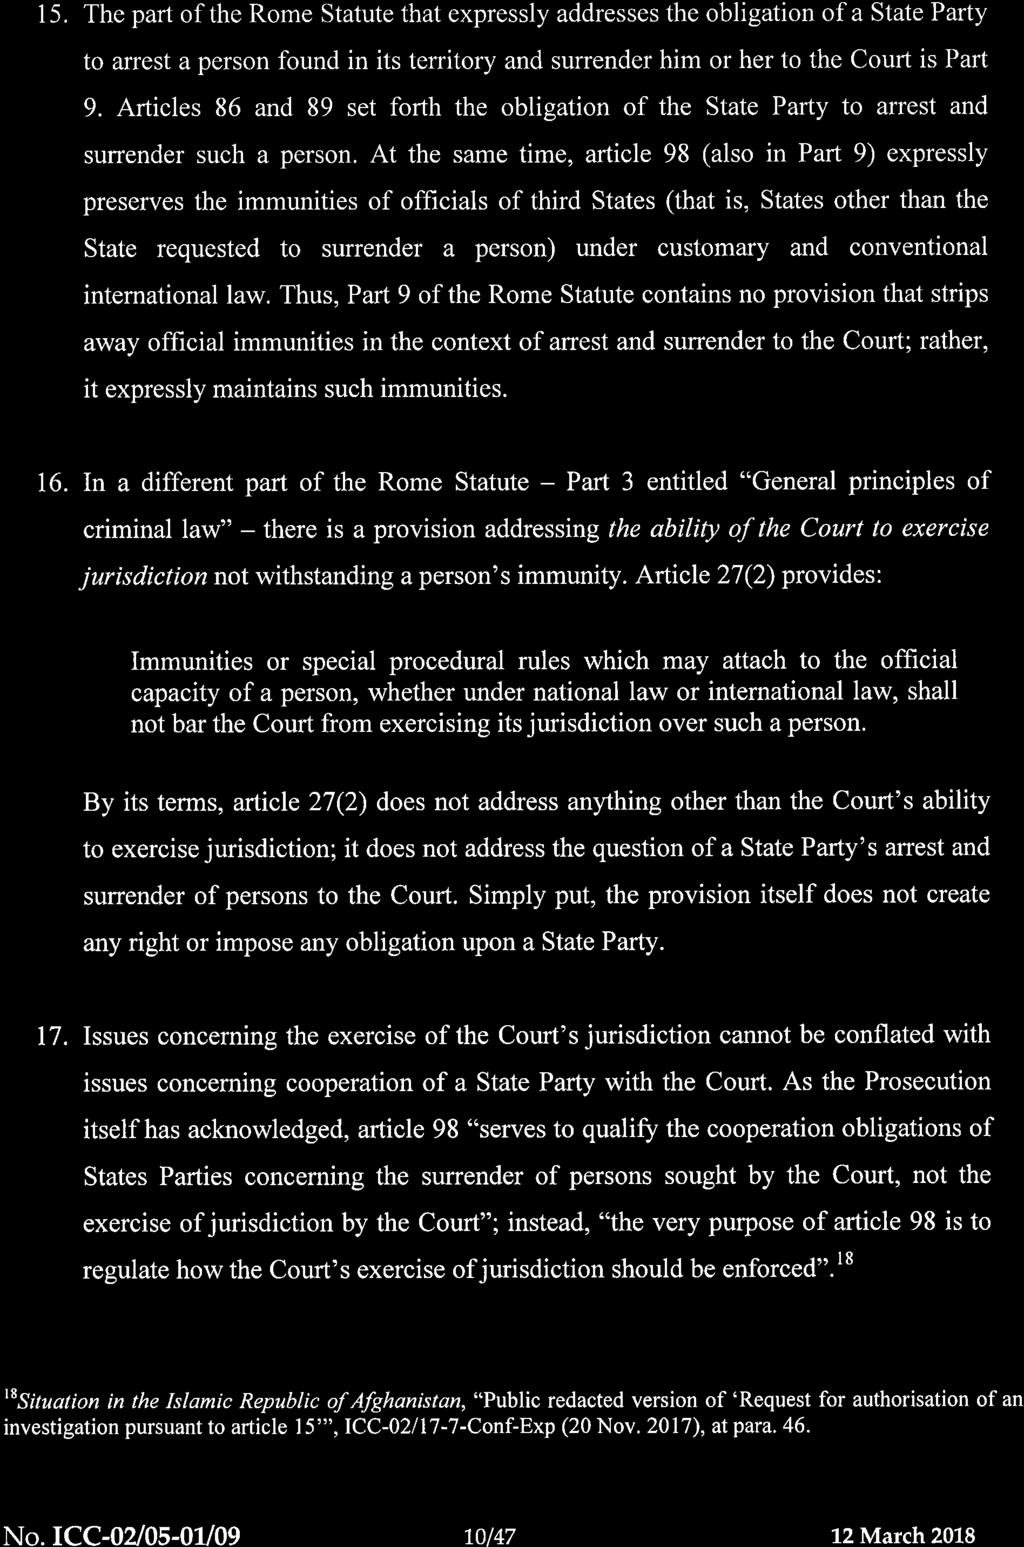 ICC-02/05-01/09-326 12-03-2018 10/47 RH PT OA2 (iii) Article 27(2) cannot be construed as removing the customary and conventional international law immunities enjoyed by President Al-Bashir 15.